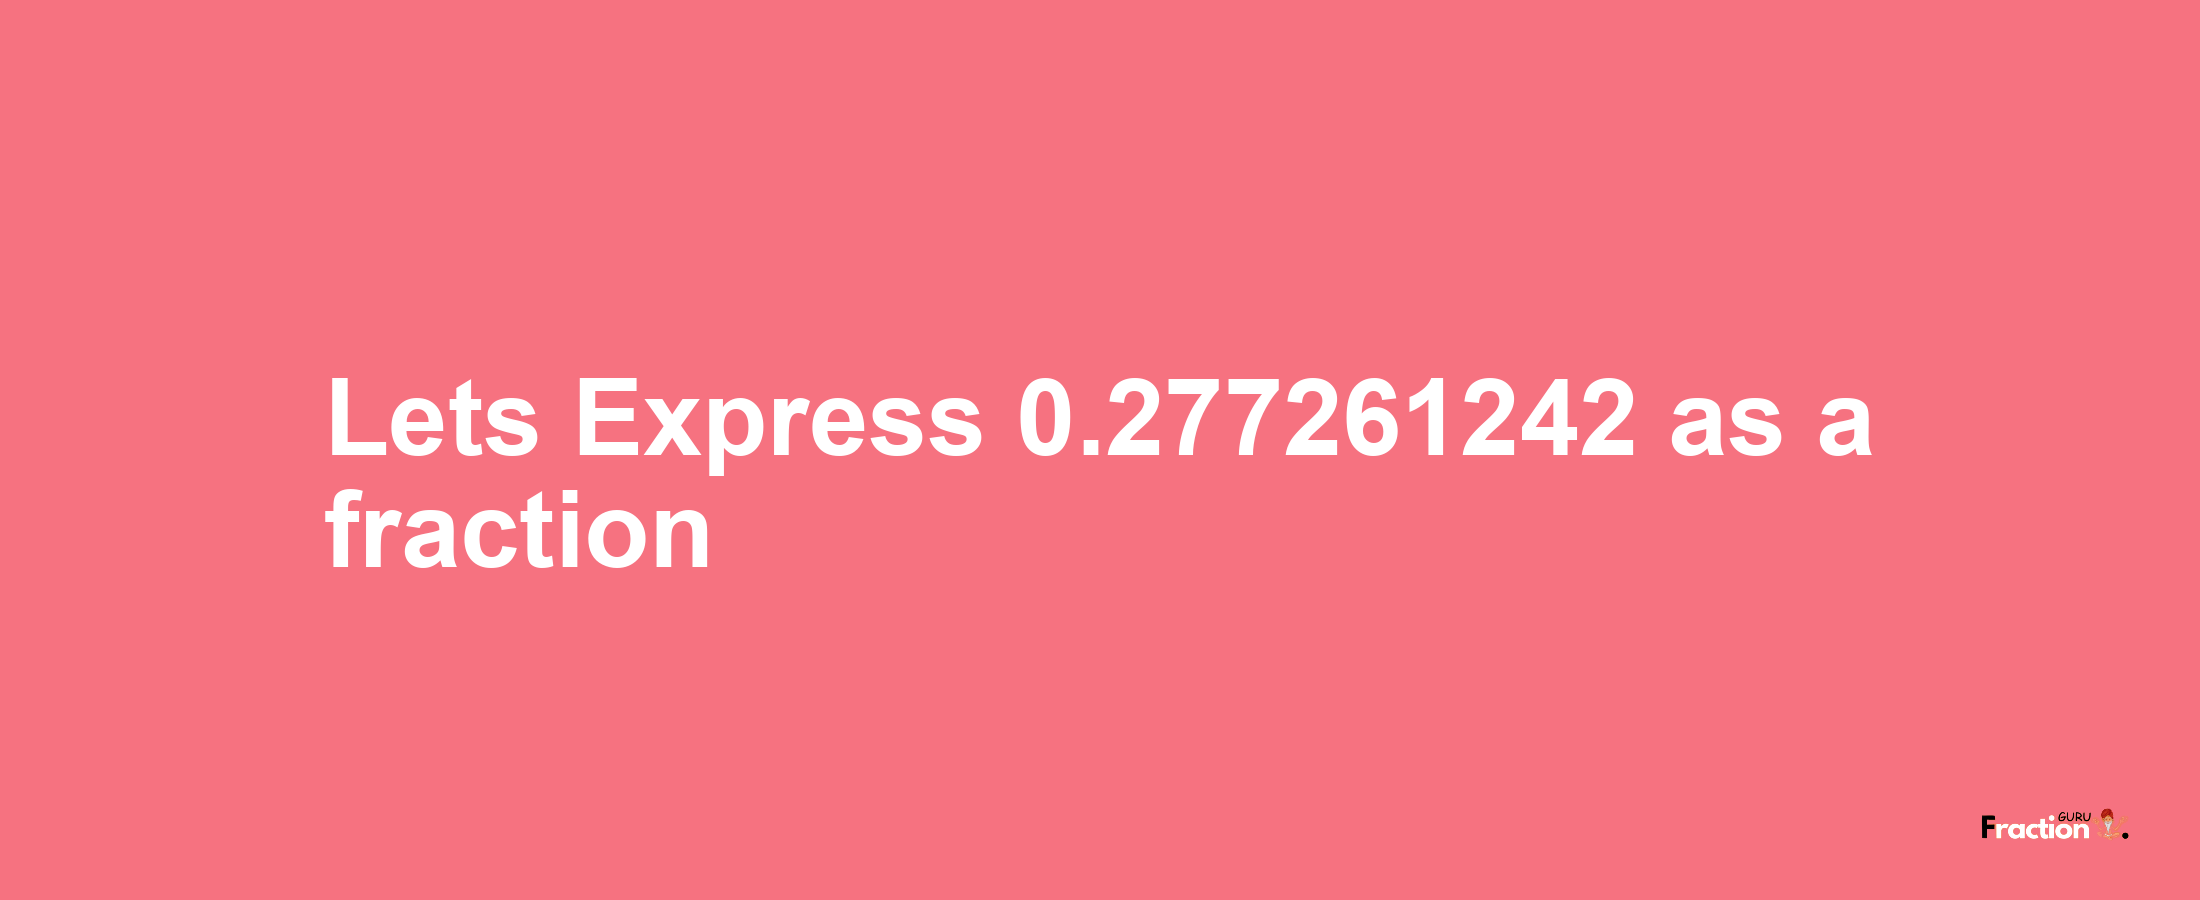 Lets Express 0.277261242 as afraction